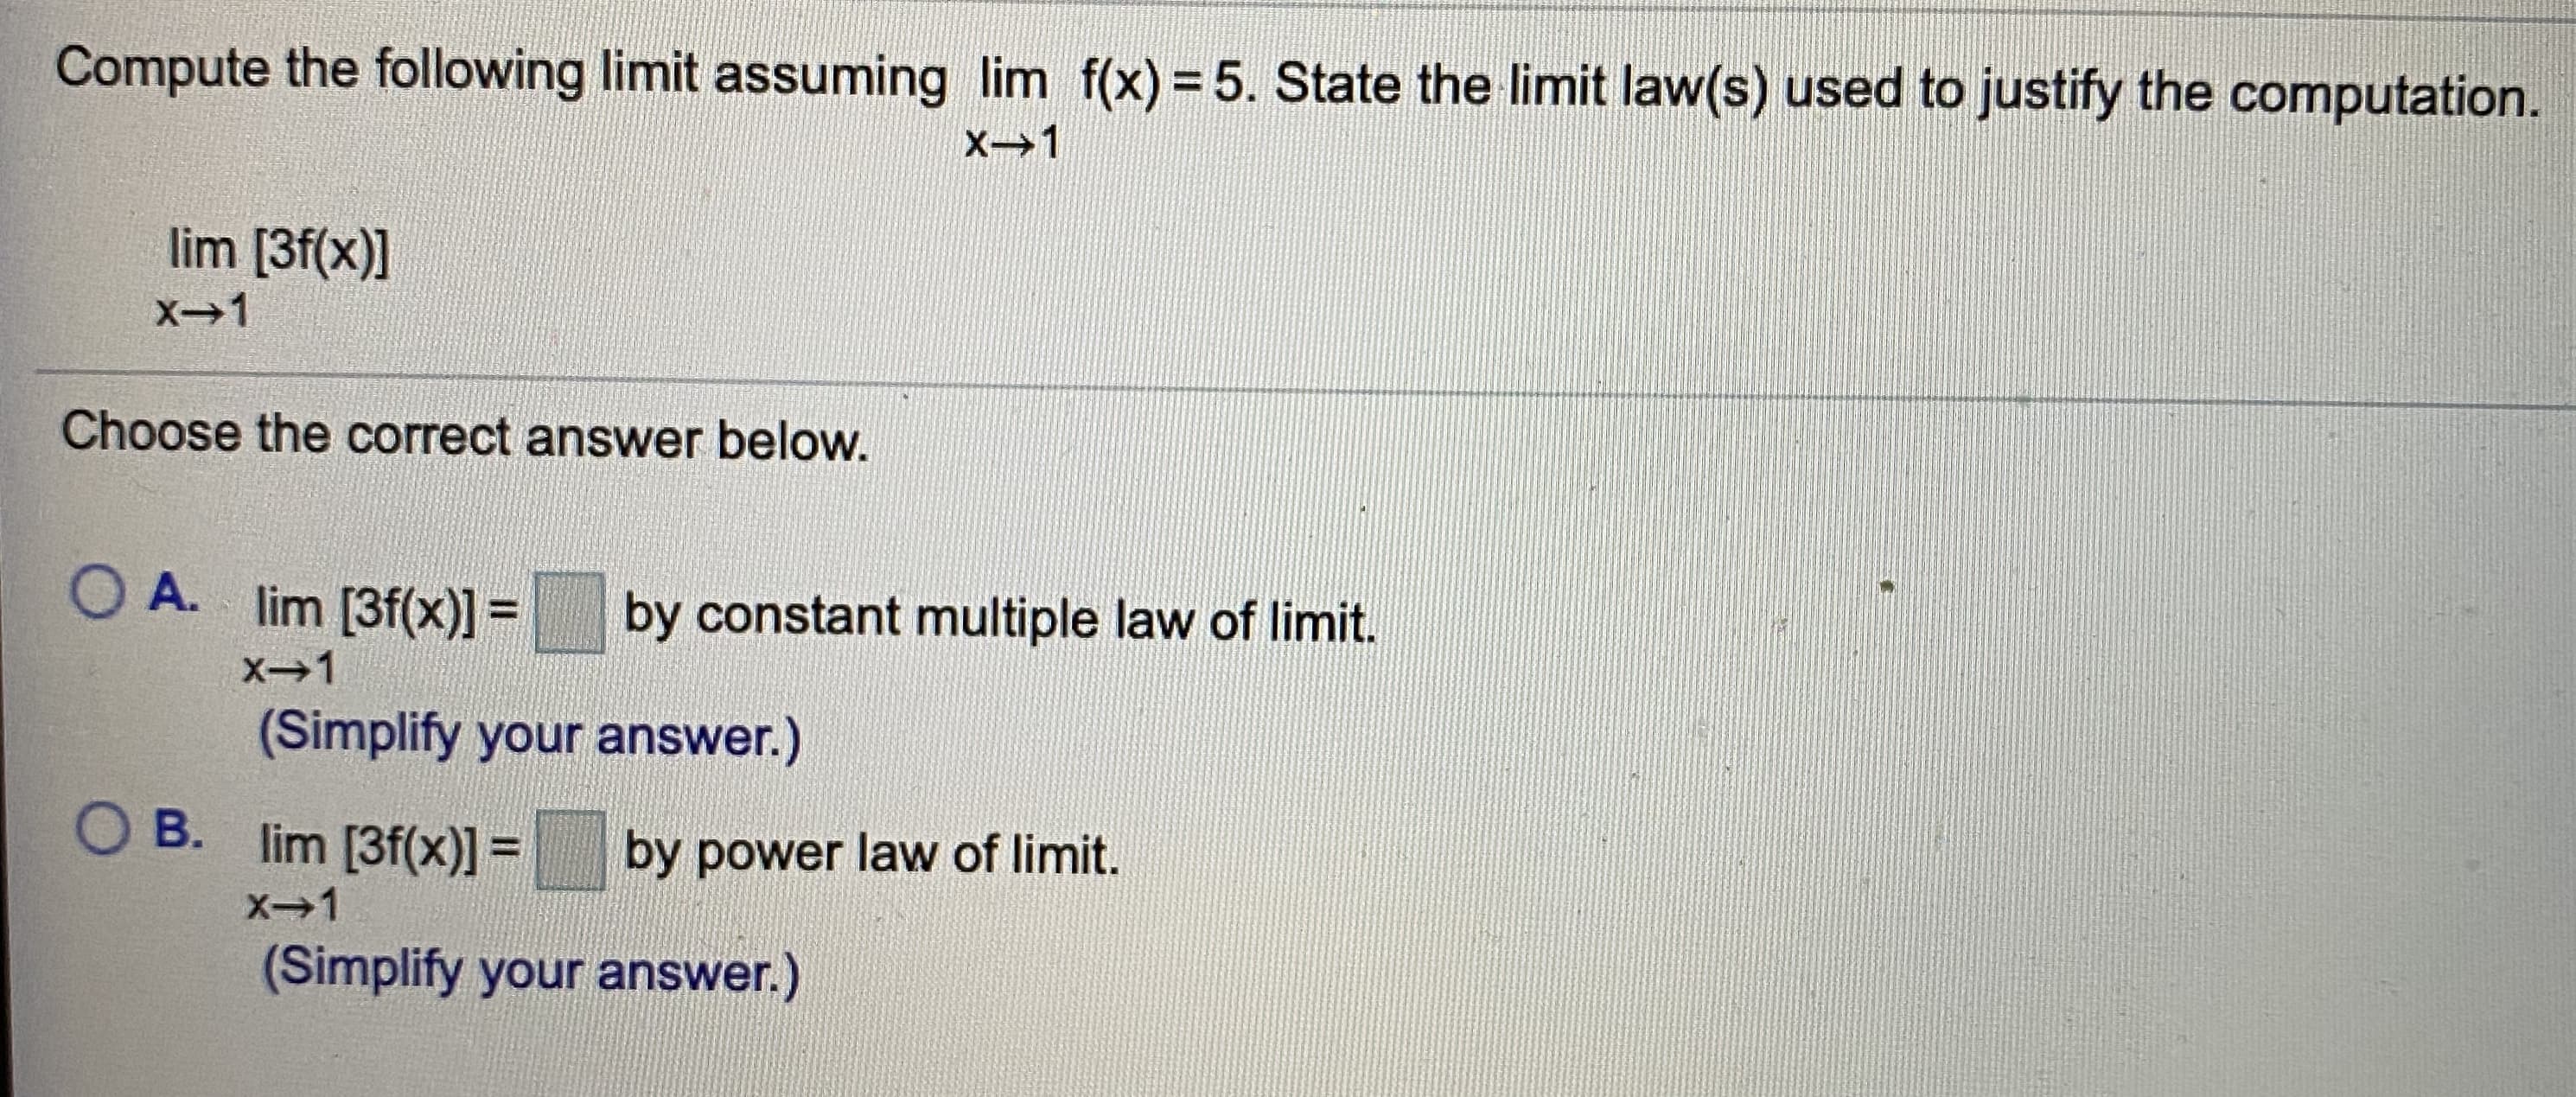 Compute the following limit assuming lim f(x) = 5. State the limit law(s) used to justify the computation.
lim [3f(x)]
X-1
